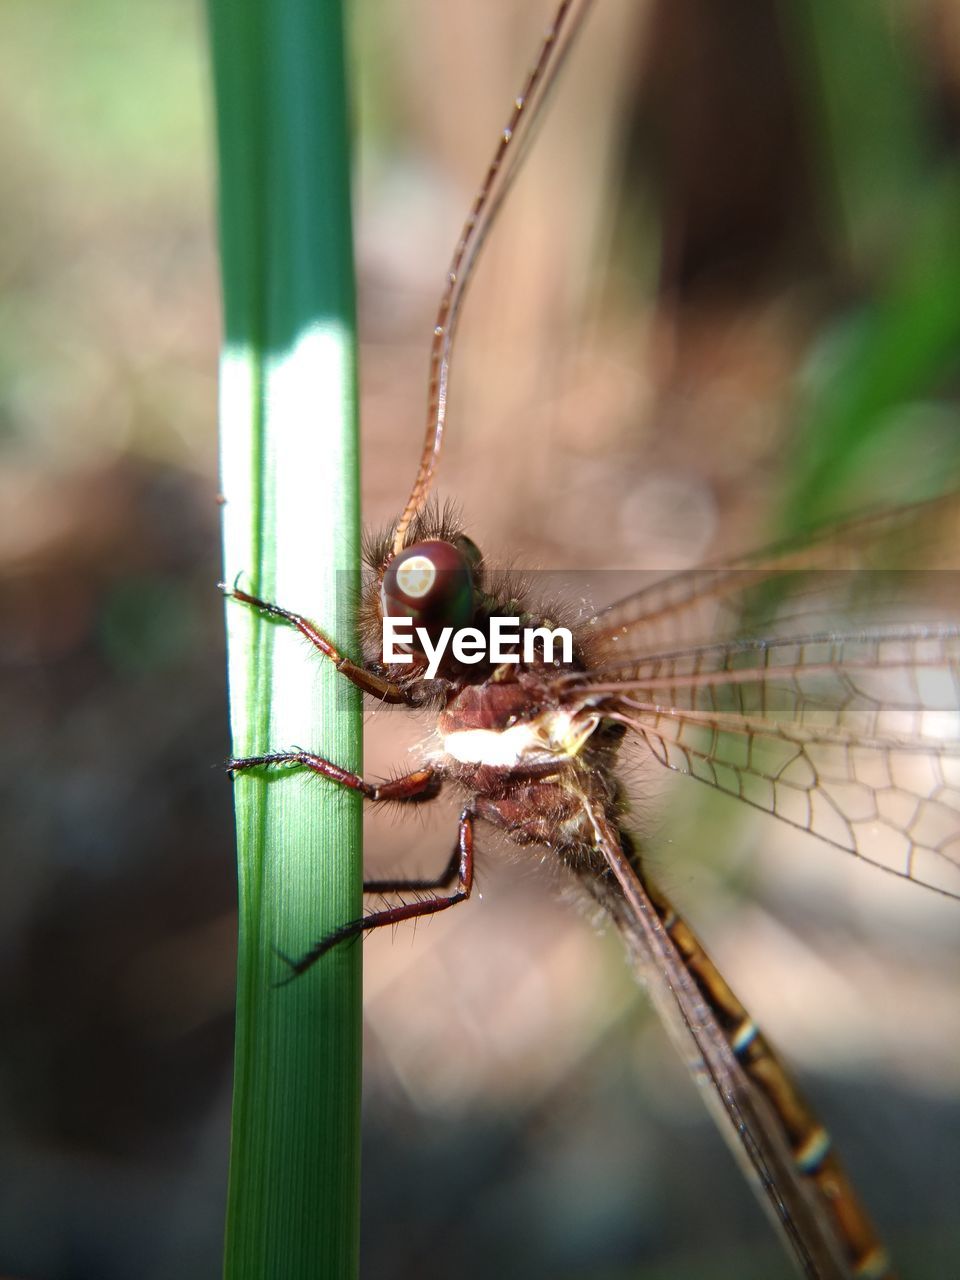 CLOSE-UP OF DRAGONFLY ON STEM